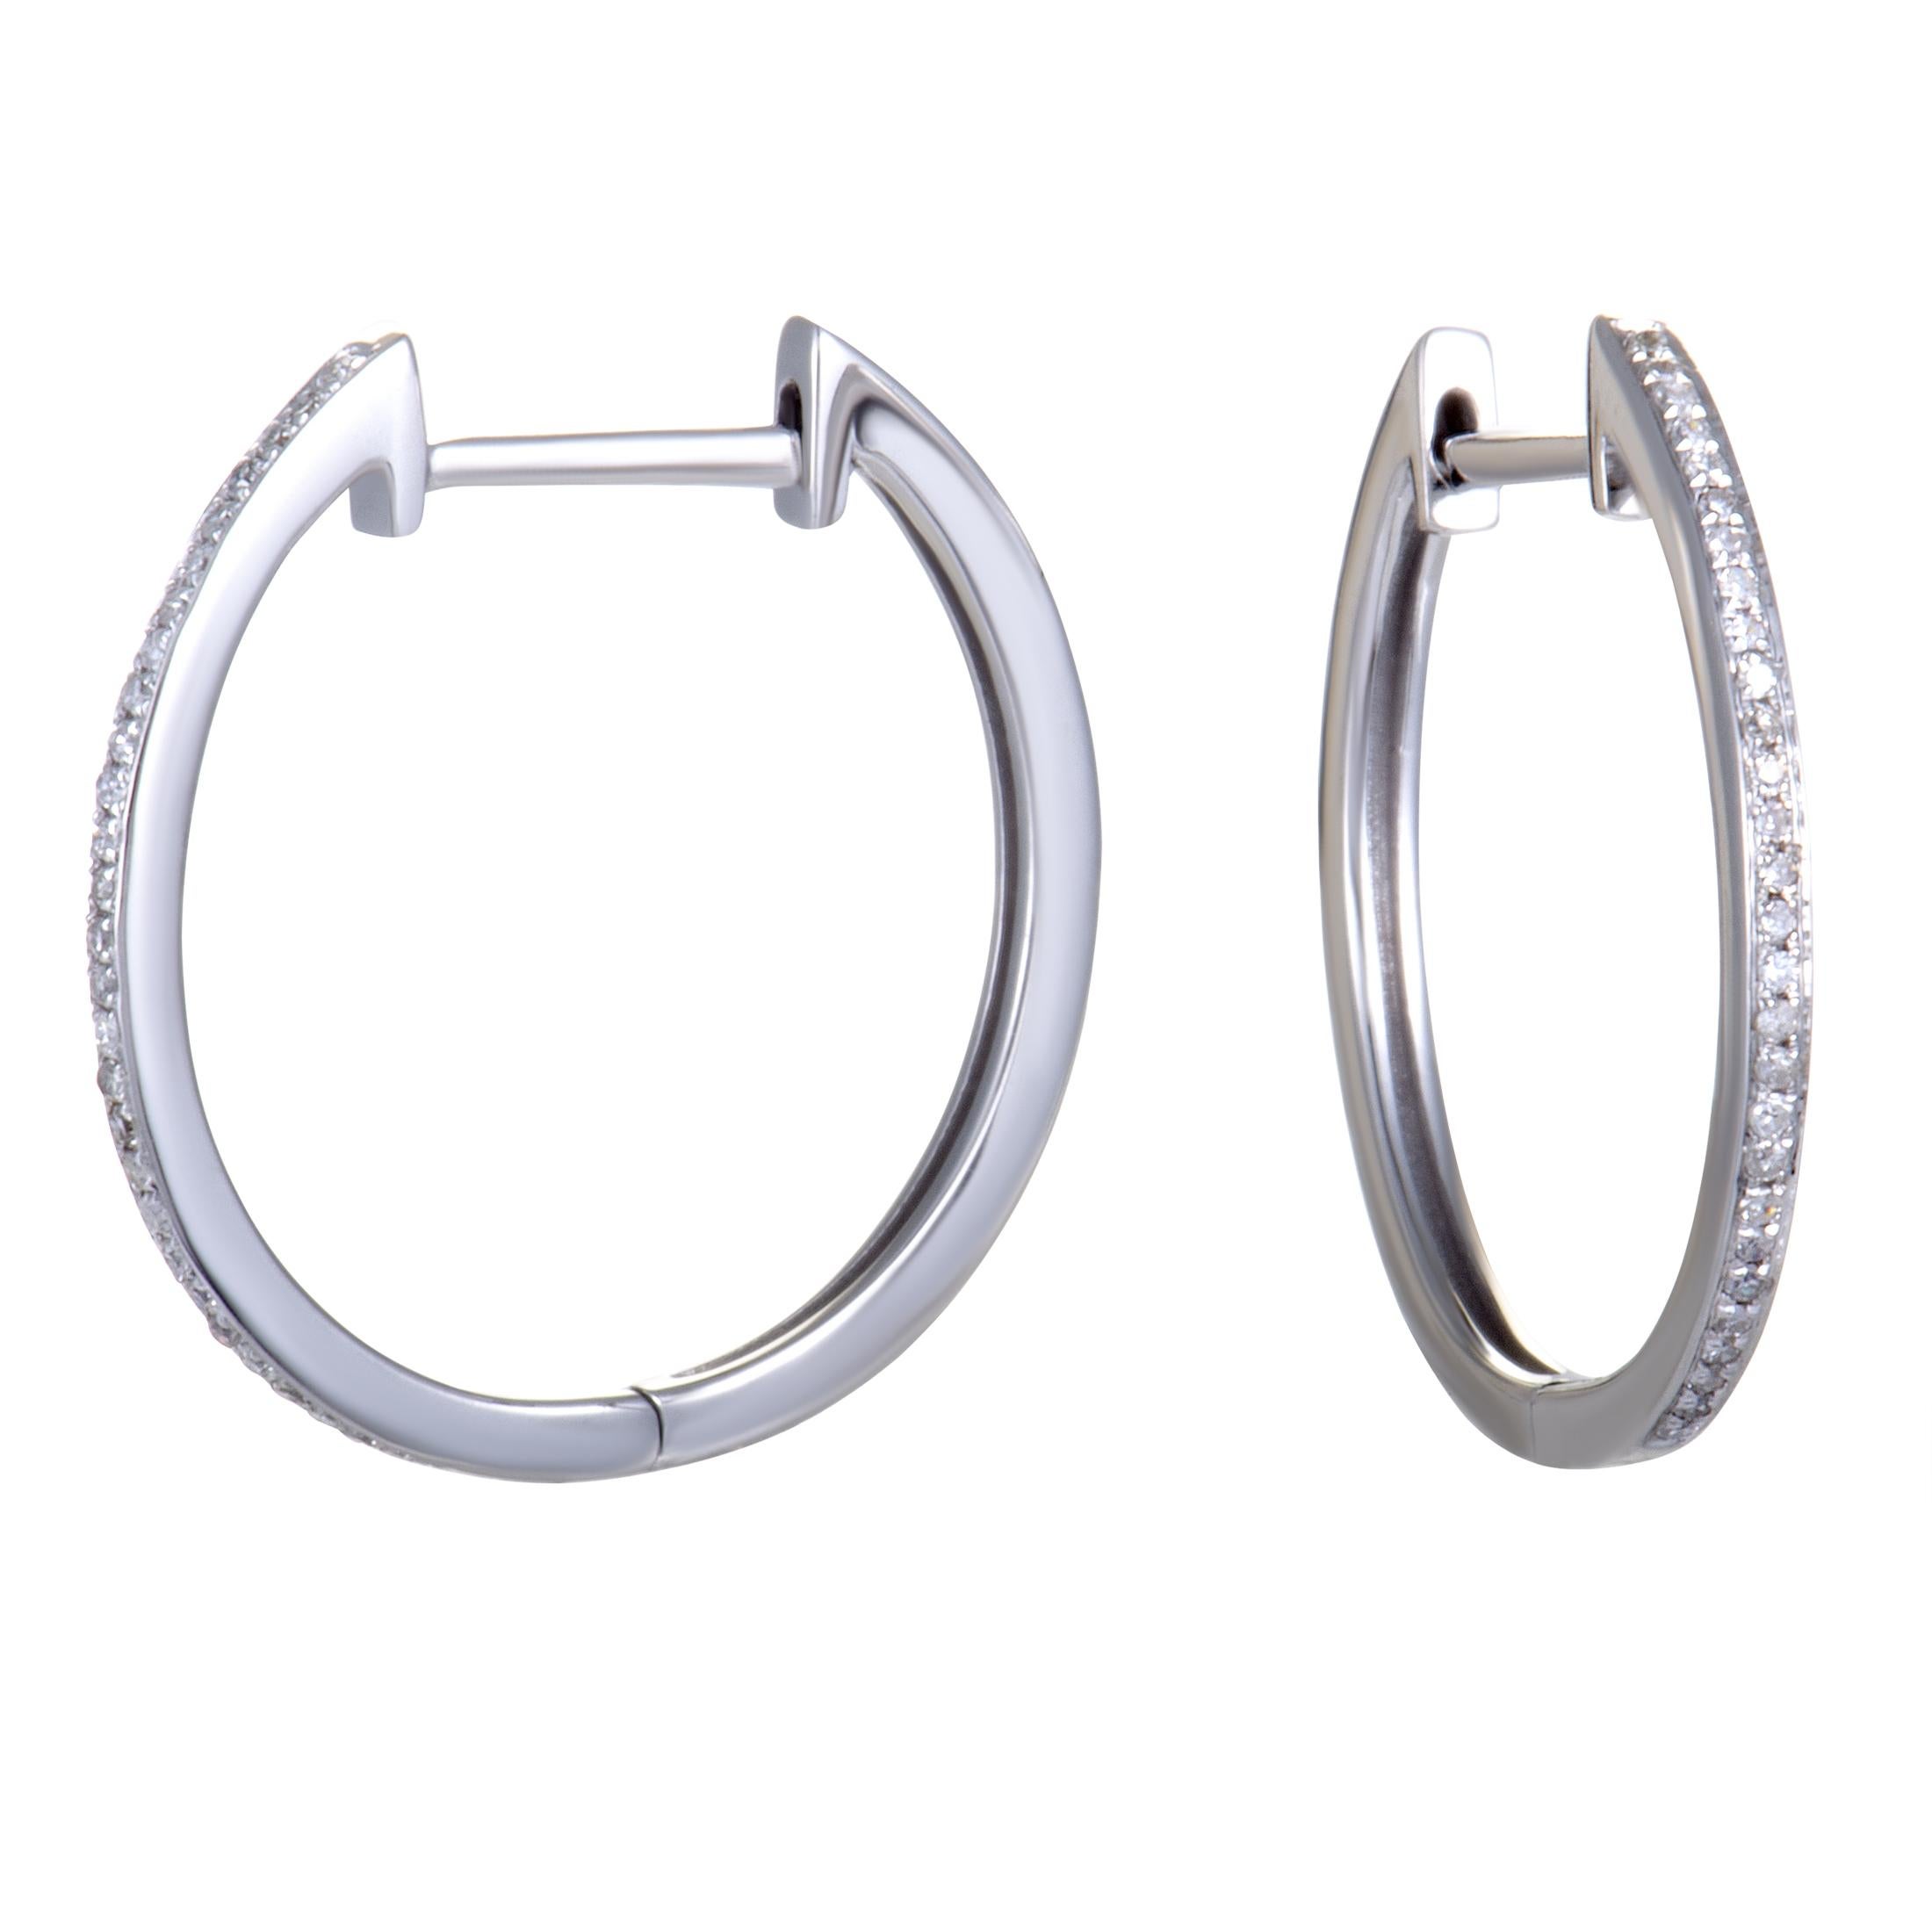 Exquisitely tasteful and elegant, these sublime hoop earrings will add a classy touch to any outfit. Made of gleaming 14K white gold, the earrings are set with scintillating diamonds that weigh in total 0.10 carats.
